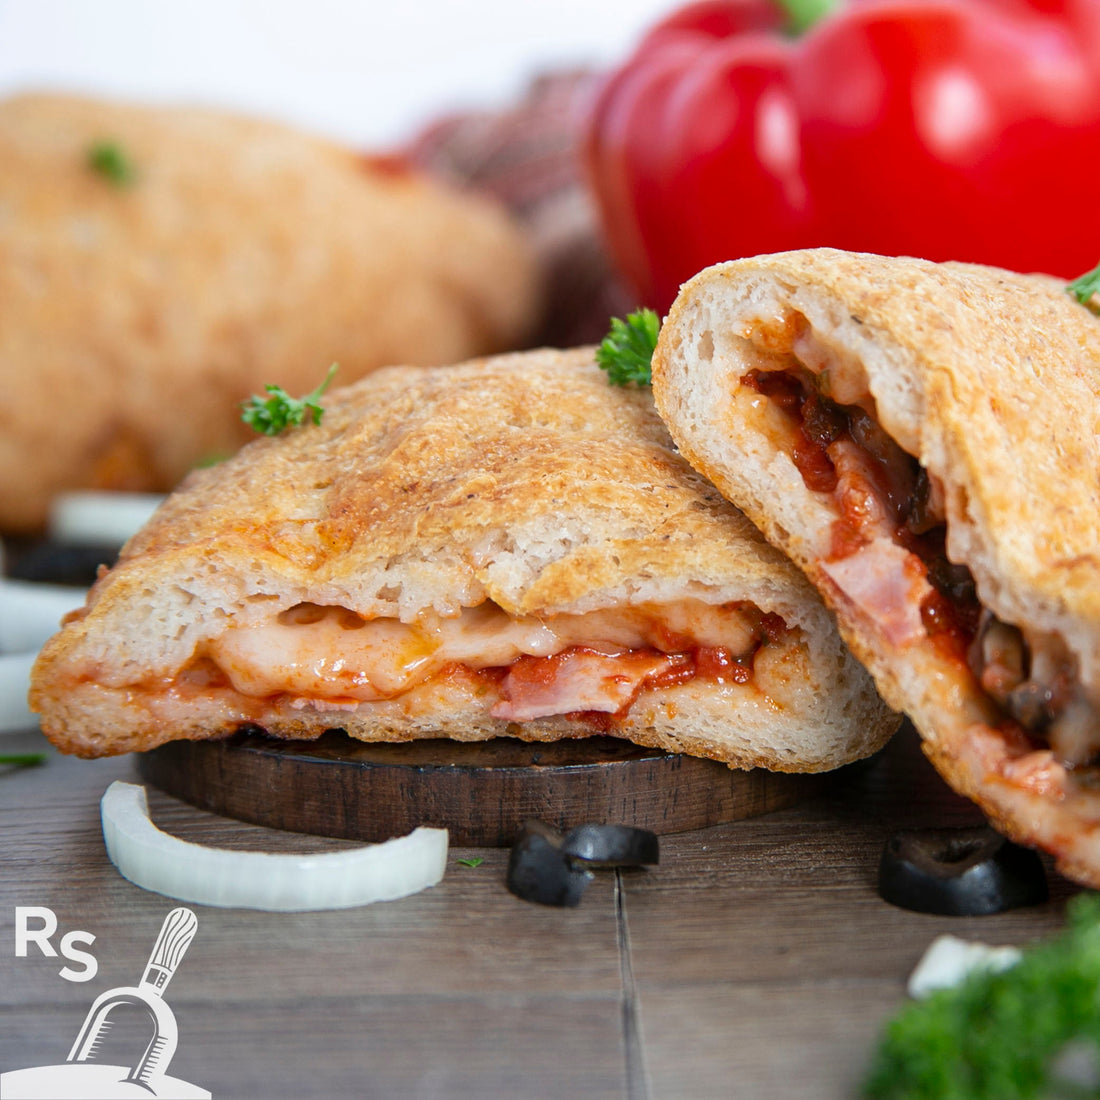 Skip Pizza Night and Ramp Up Dinner With Calzones!